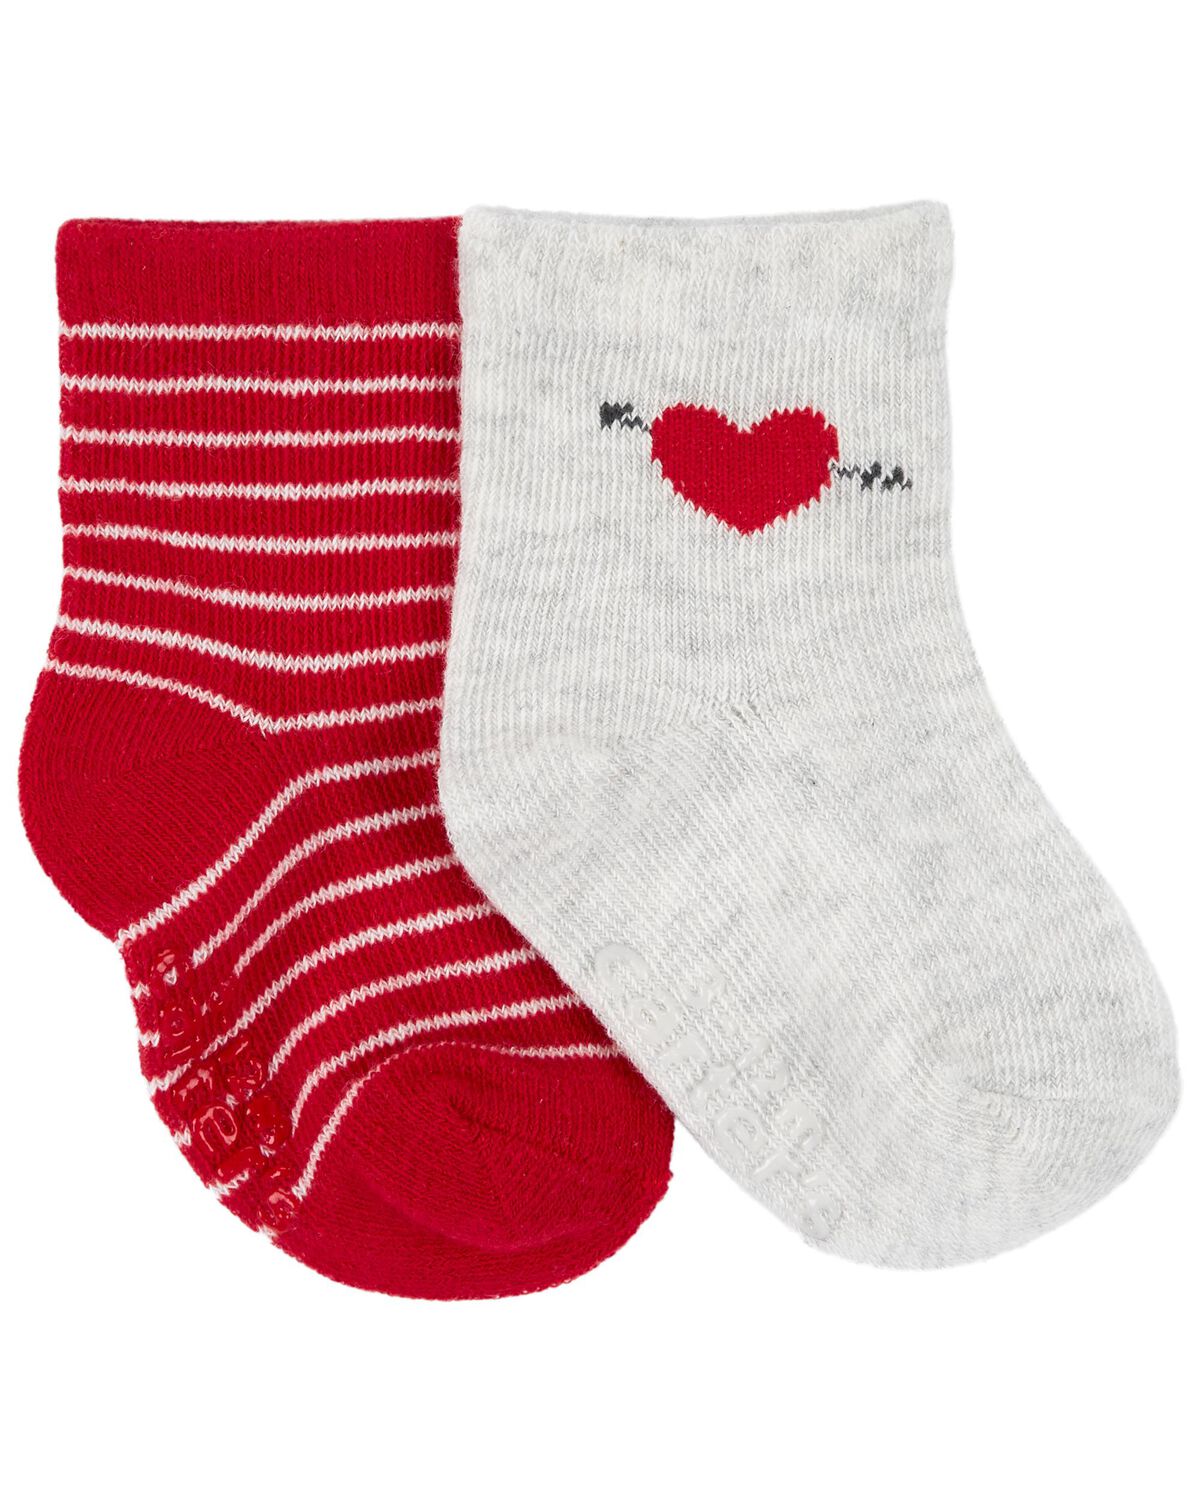 Red/Heather Baby 2-Pack Valentine's Day Socks | carters.com